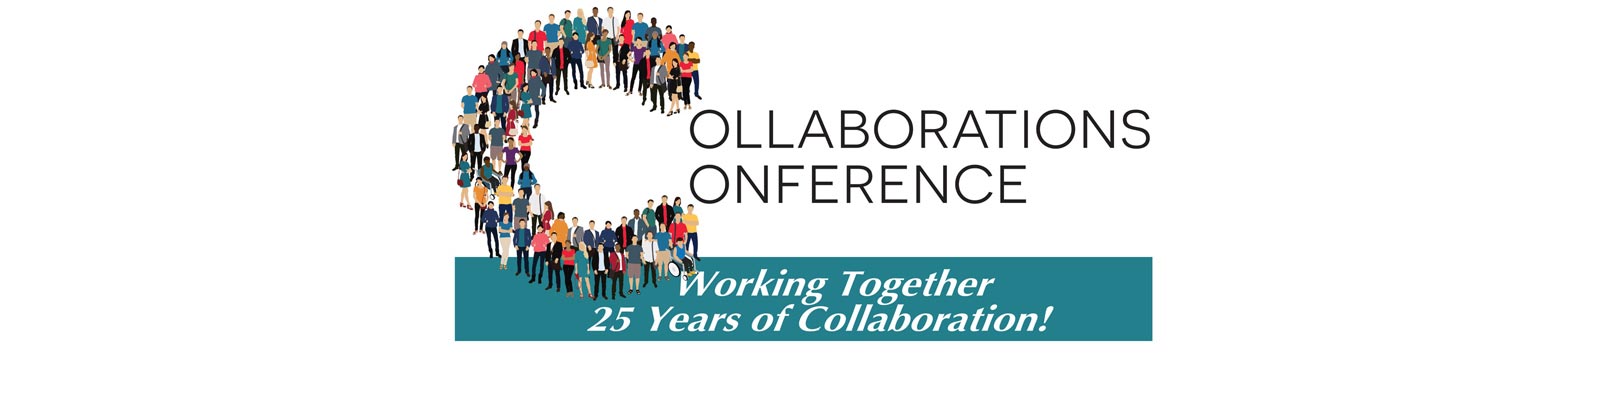 2024 Collaborations Conference